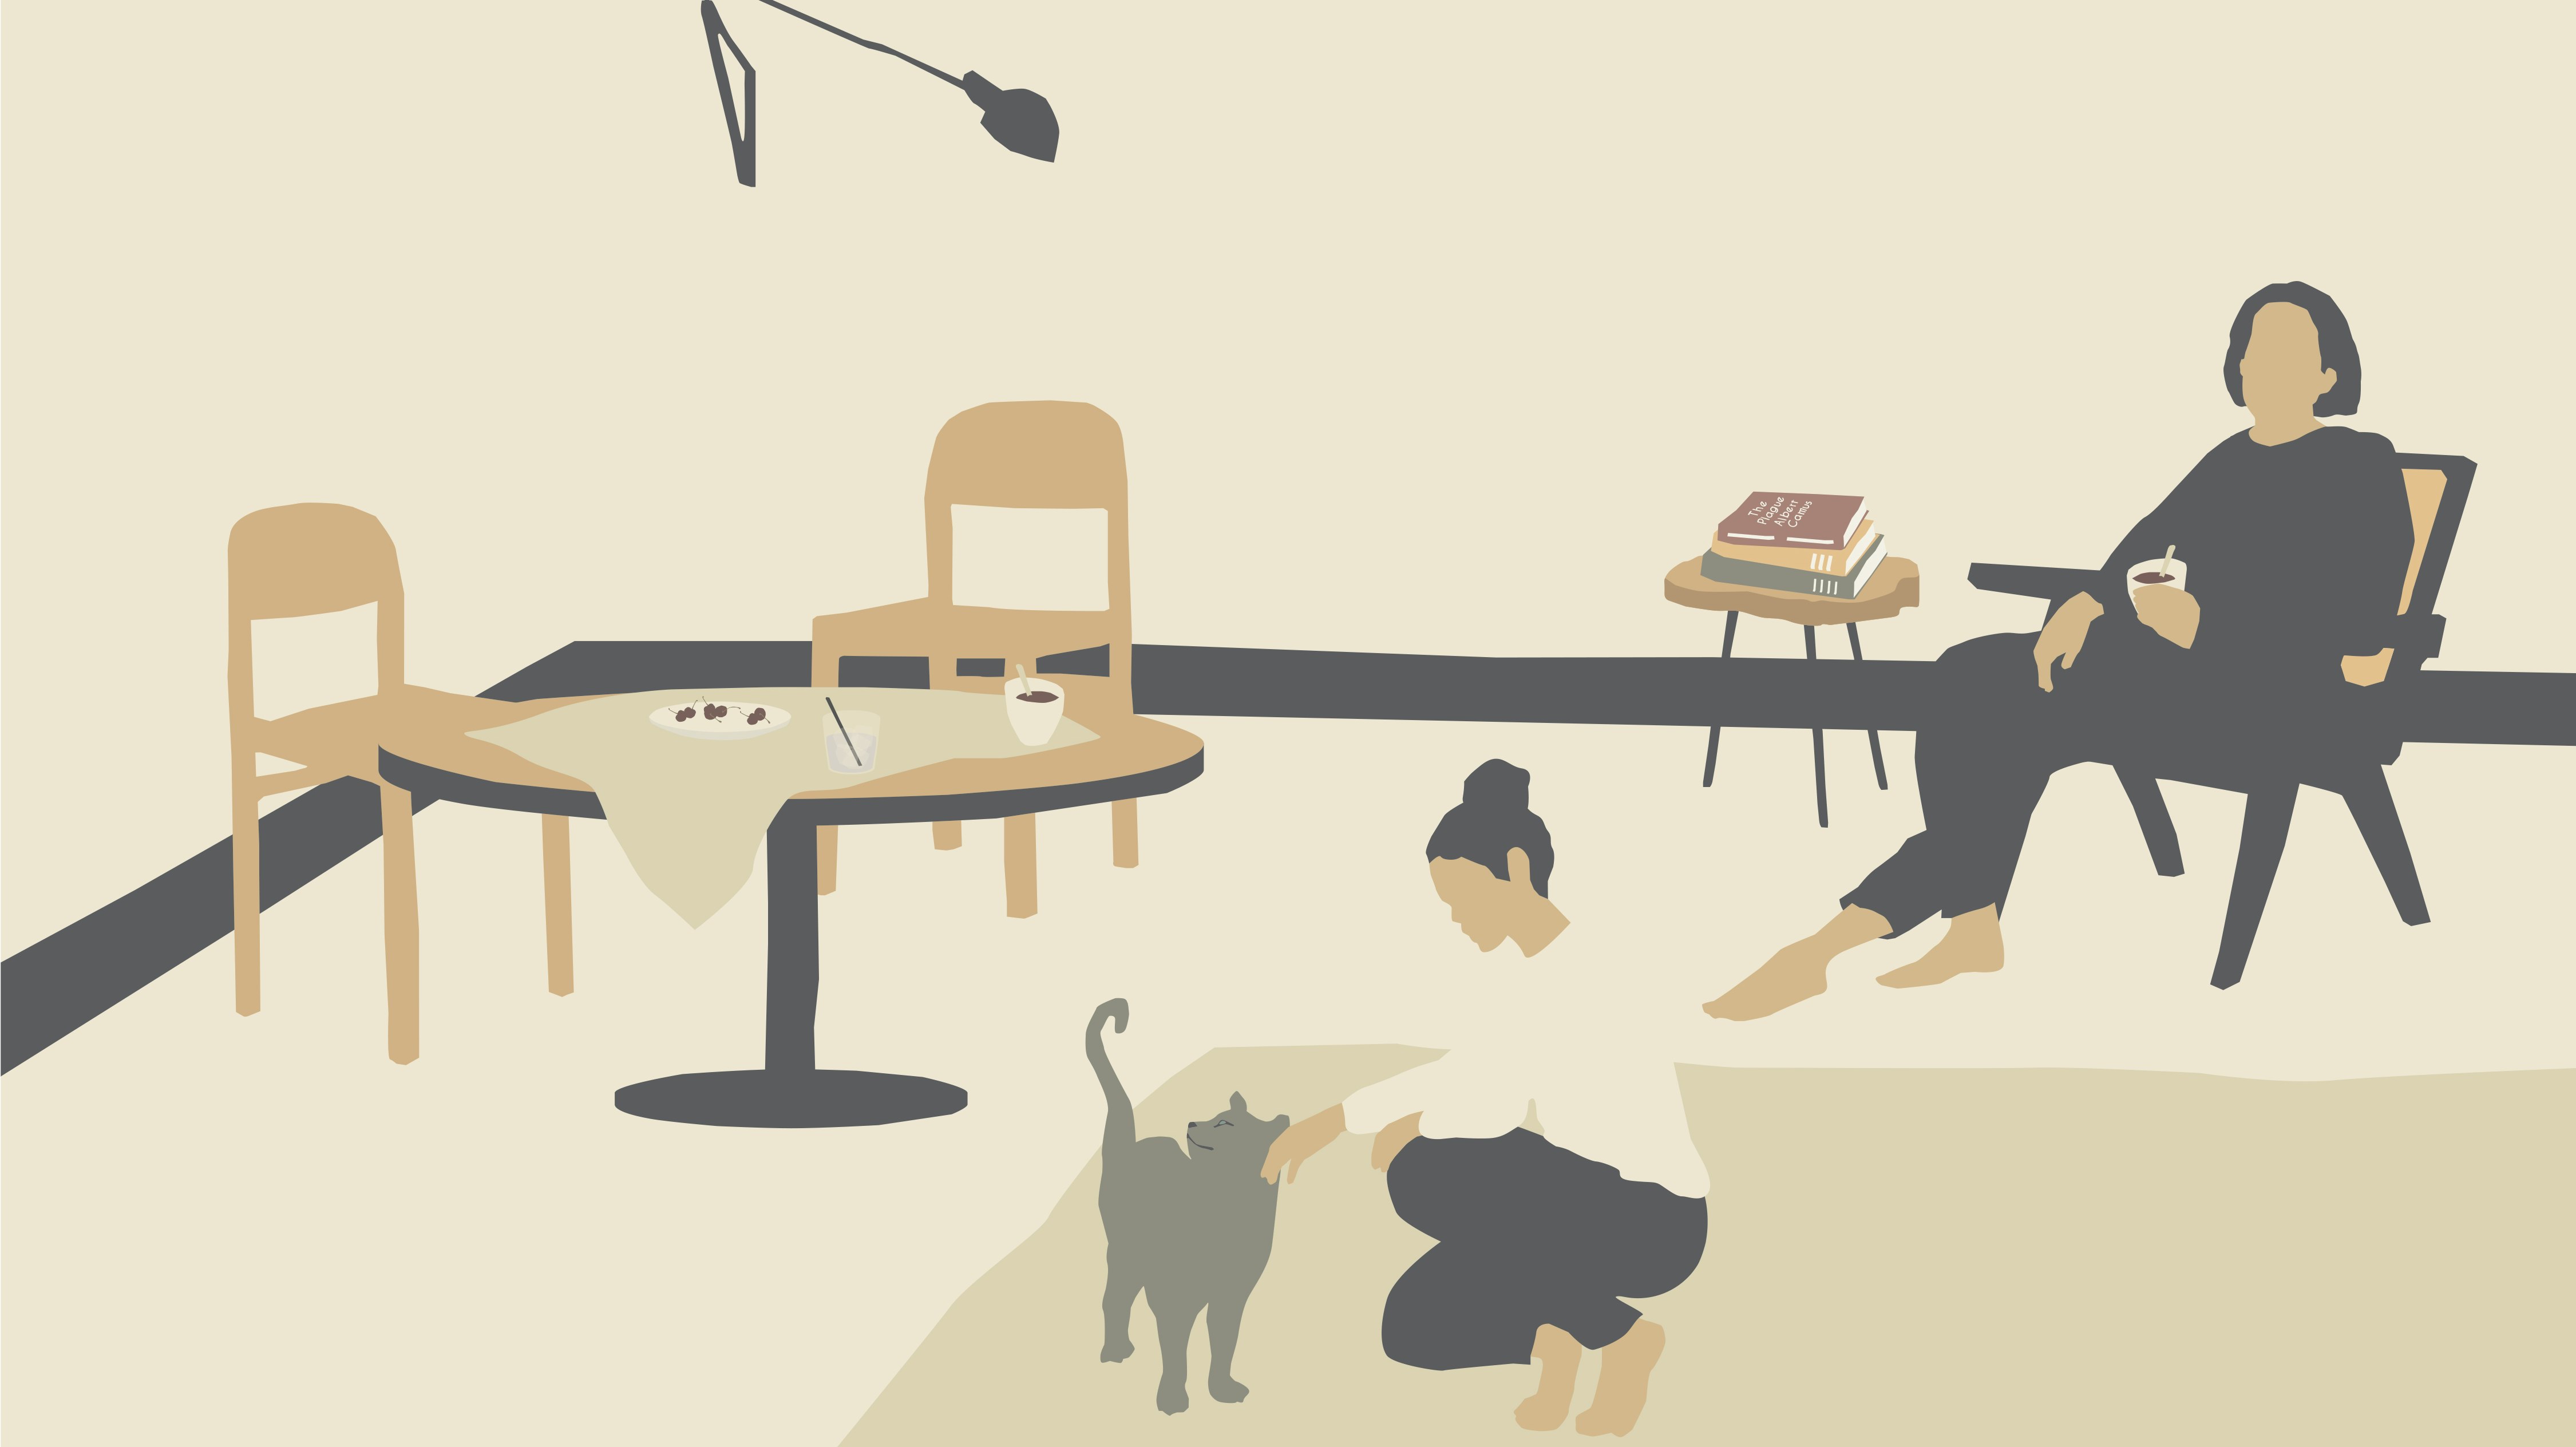 Illustration of a classroom, one person seated and one person petting a cat